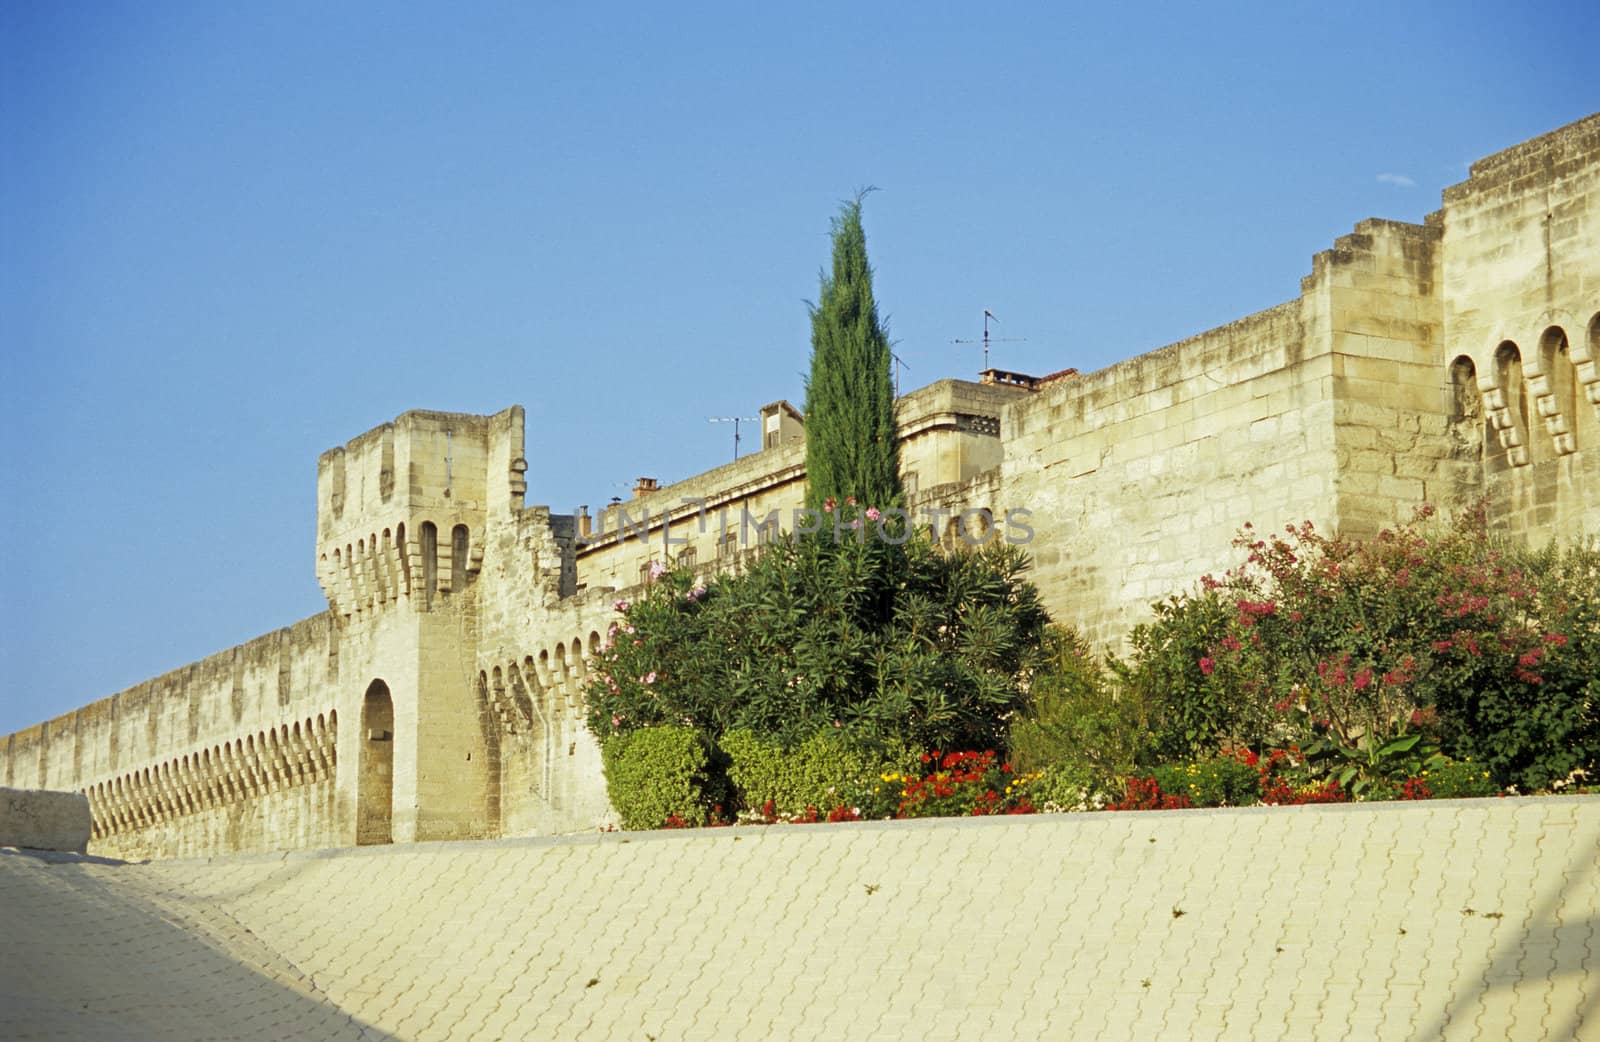 The ancient stone city wall of Avignon, France with a garden in front.